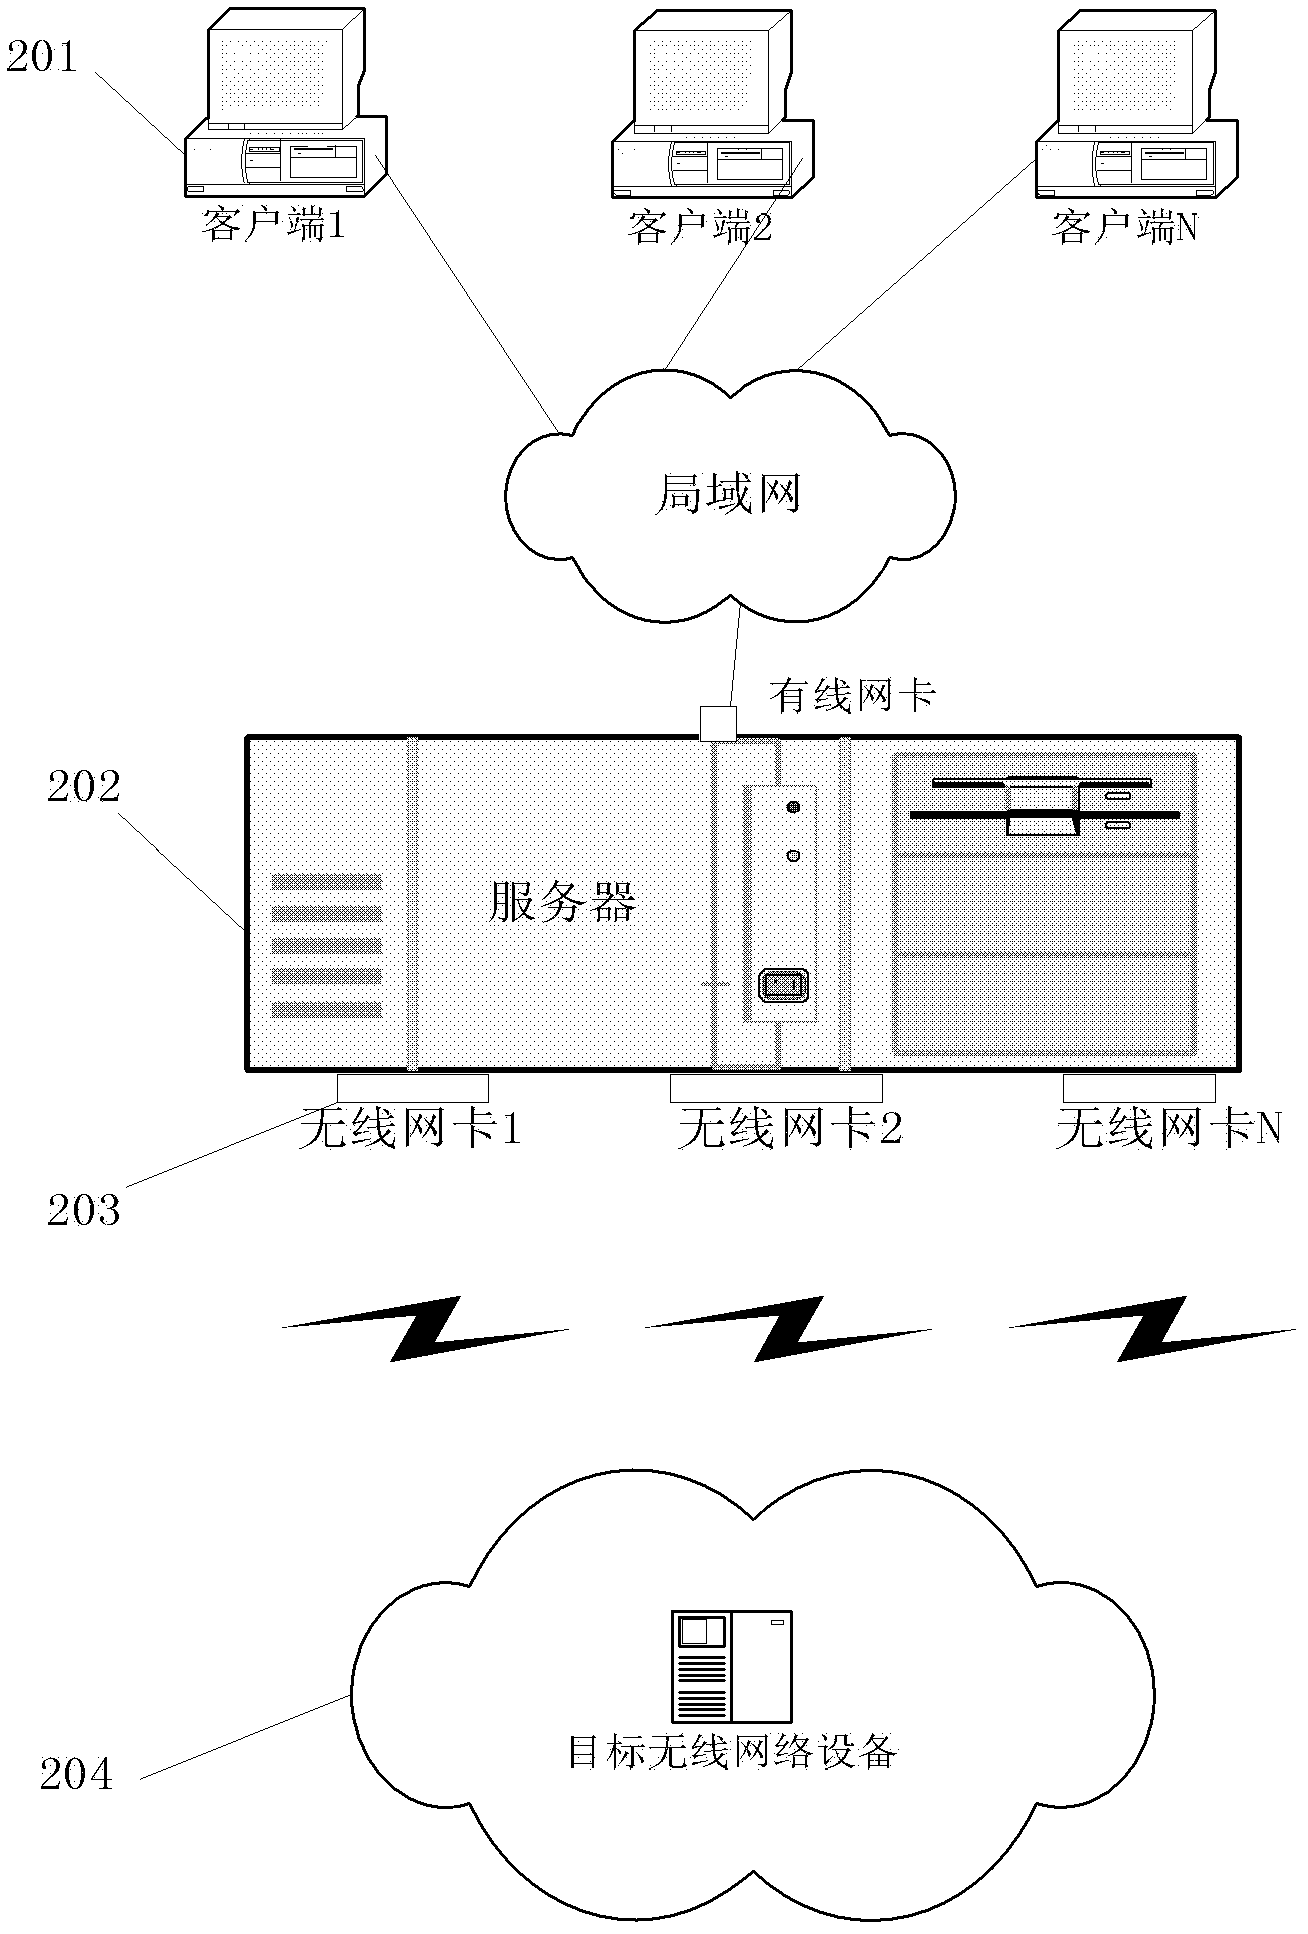 Method and system for testing message of wireless network device